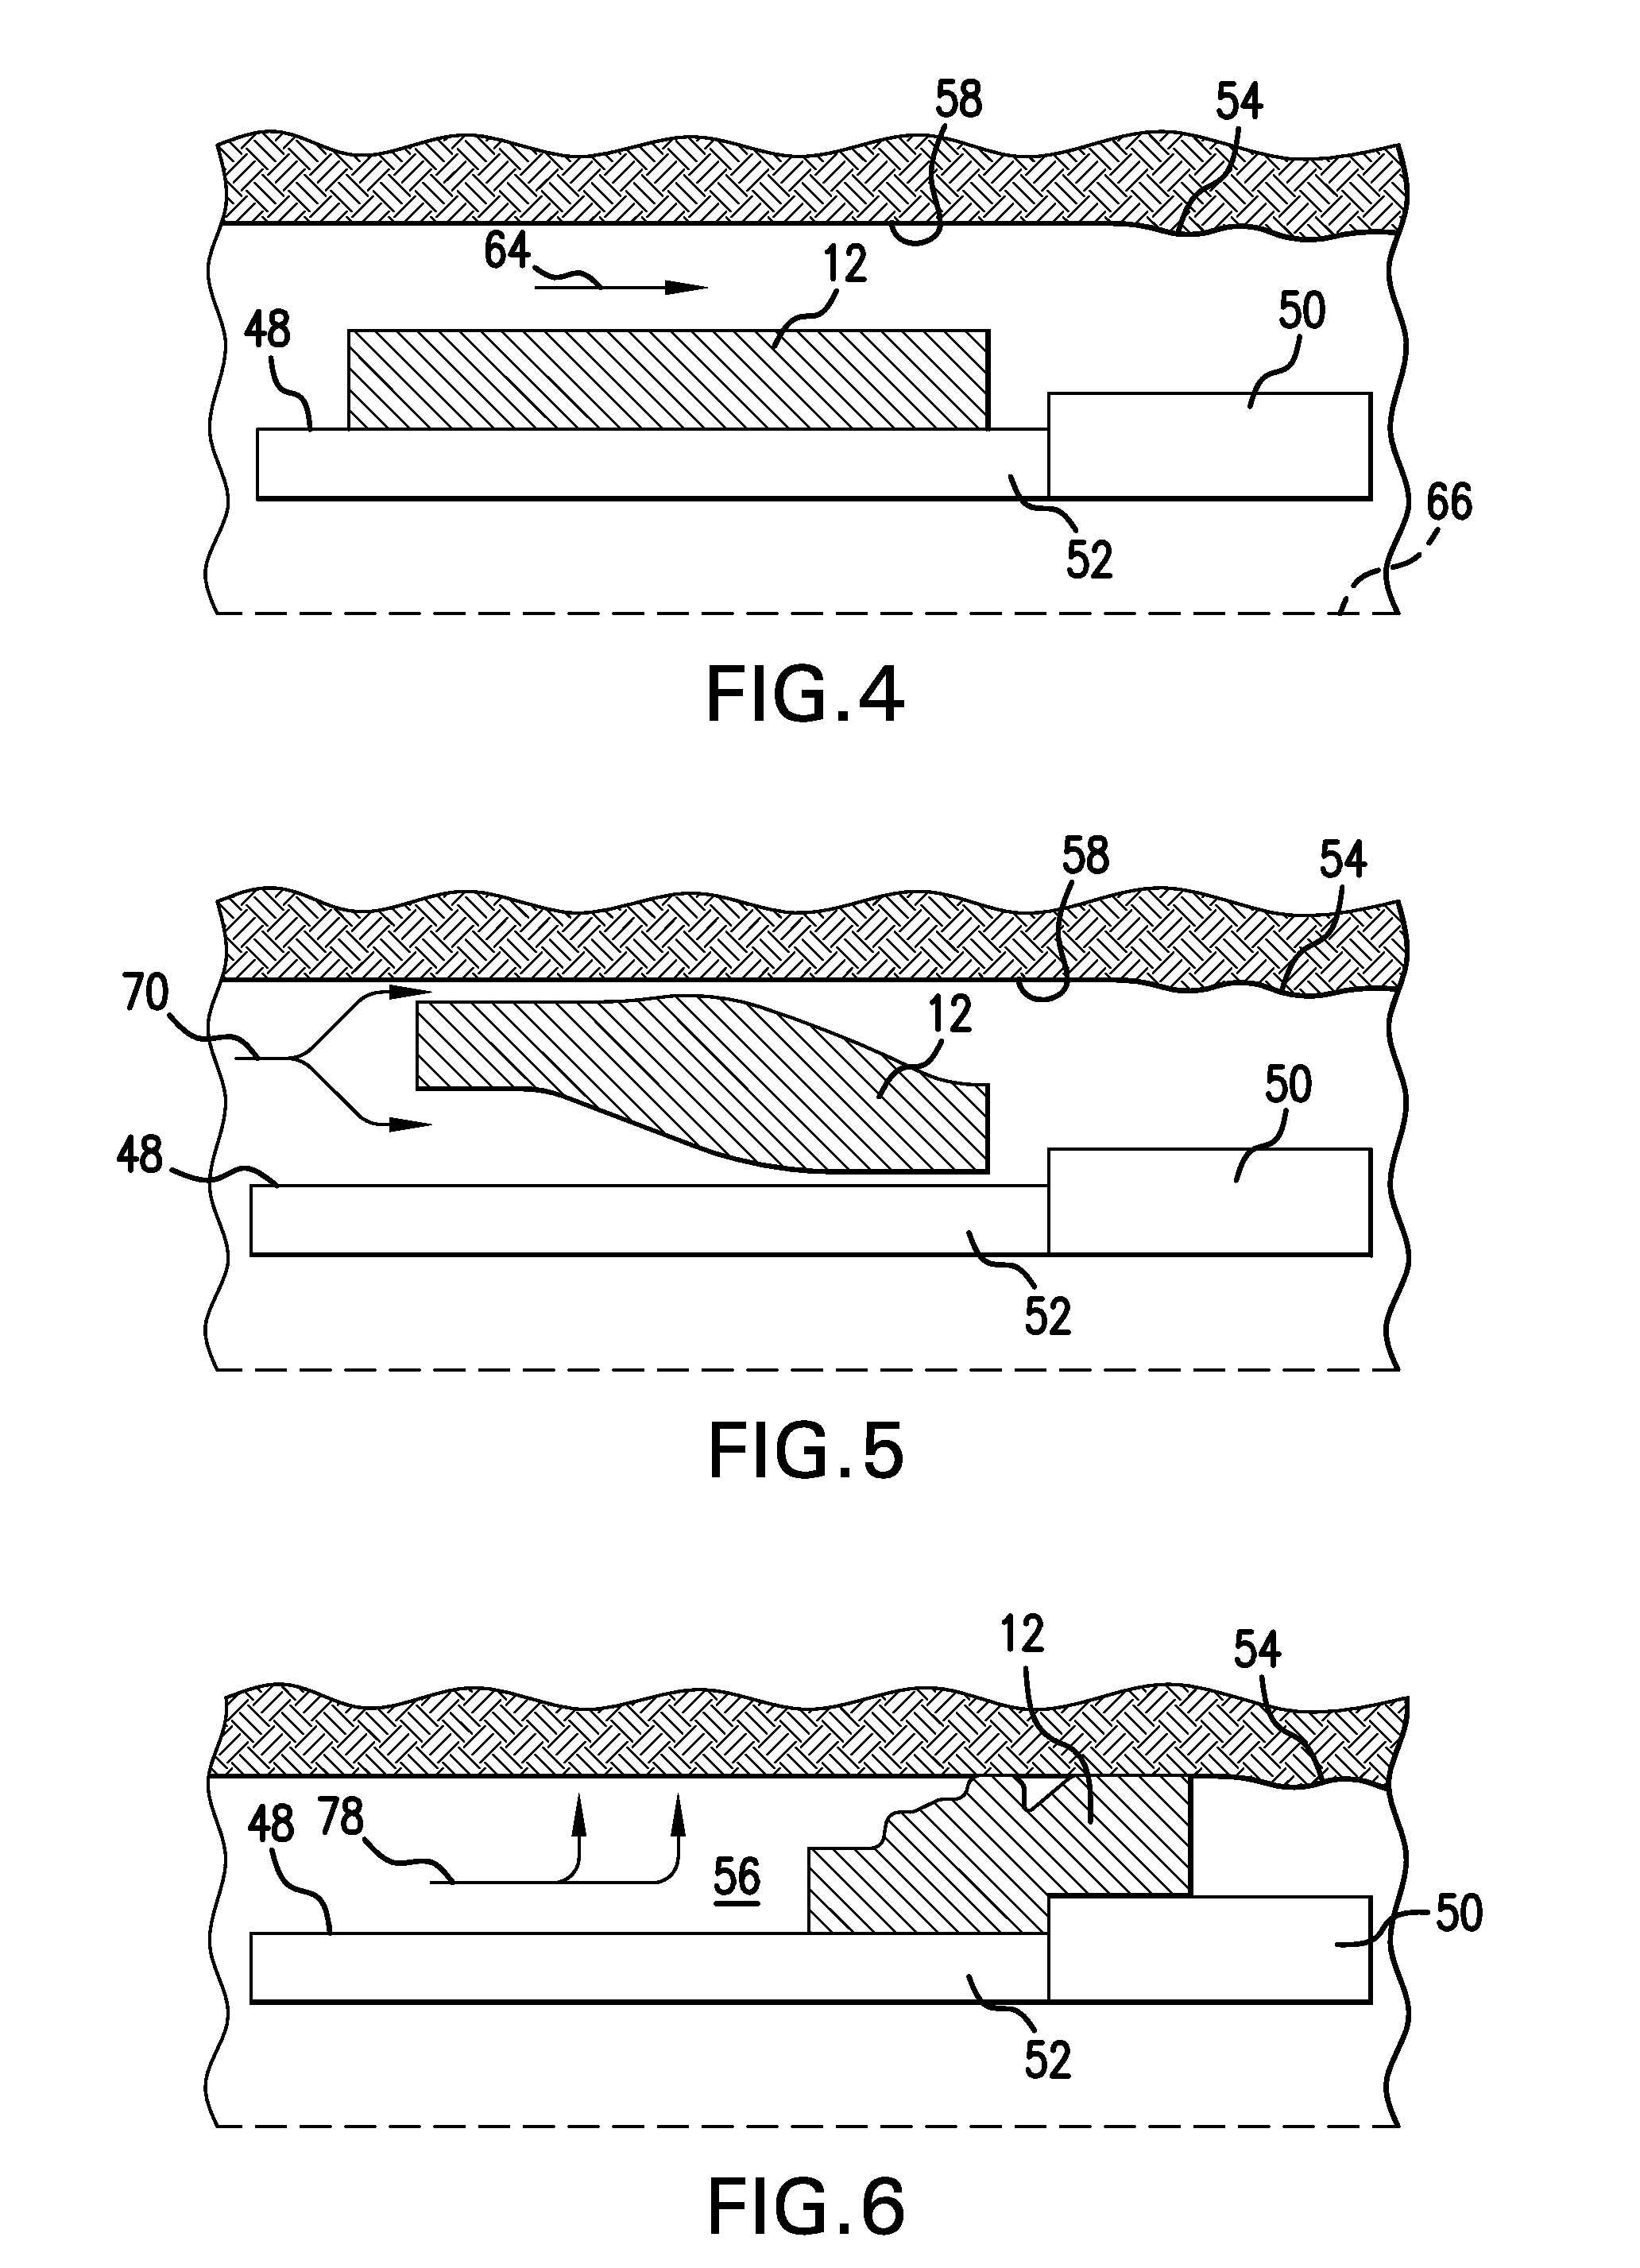 Hydraulic fracture diverter apparatus and method thereof